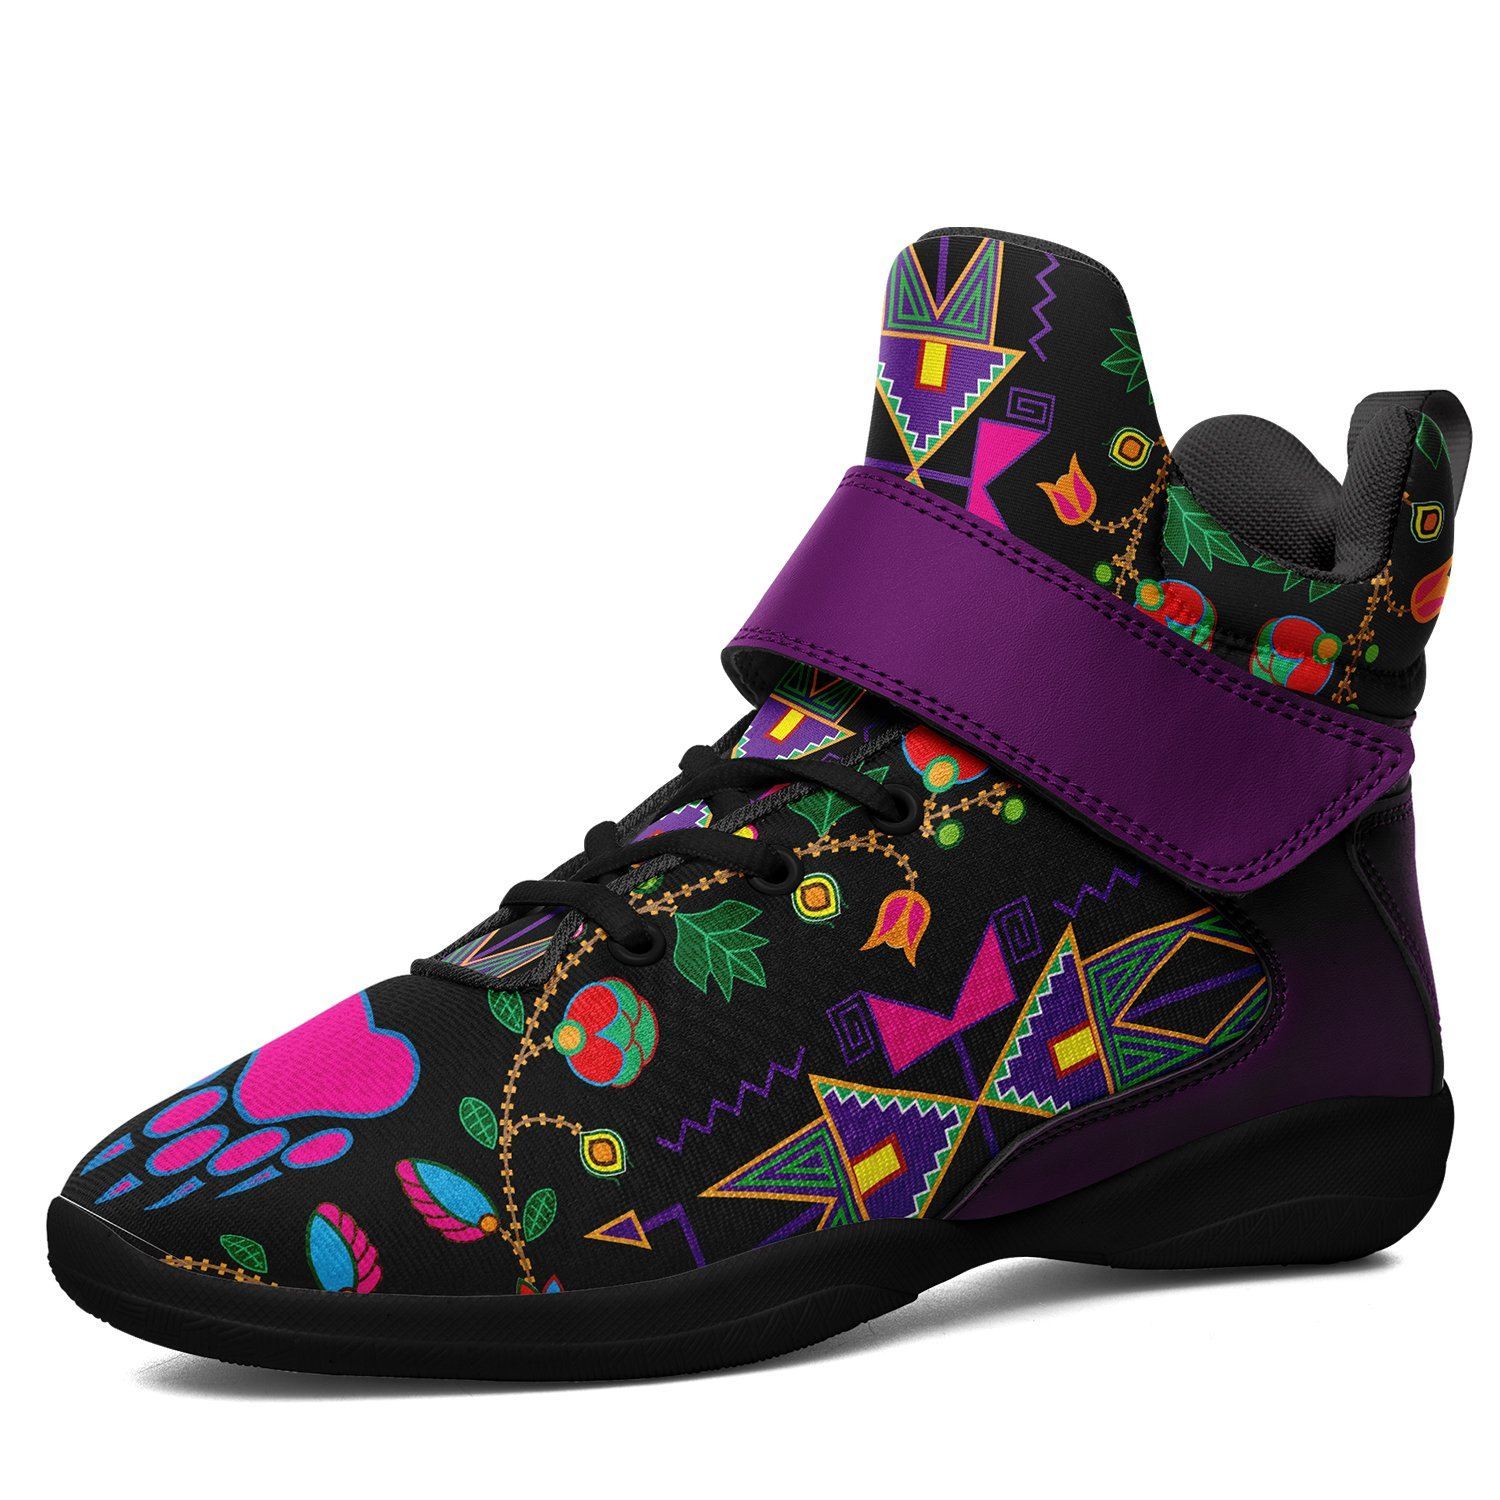 Geometric Floral Fall Black Kid's Ipottaa Basketball / Sport High Top Shoes 49 Dzine US Women 4.5 / US Youth 3.5 / EUR 35 Black Sole with Indigo Strap 